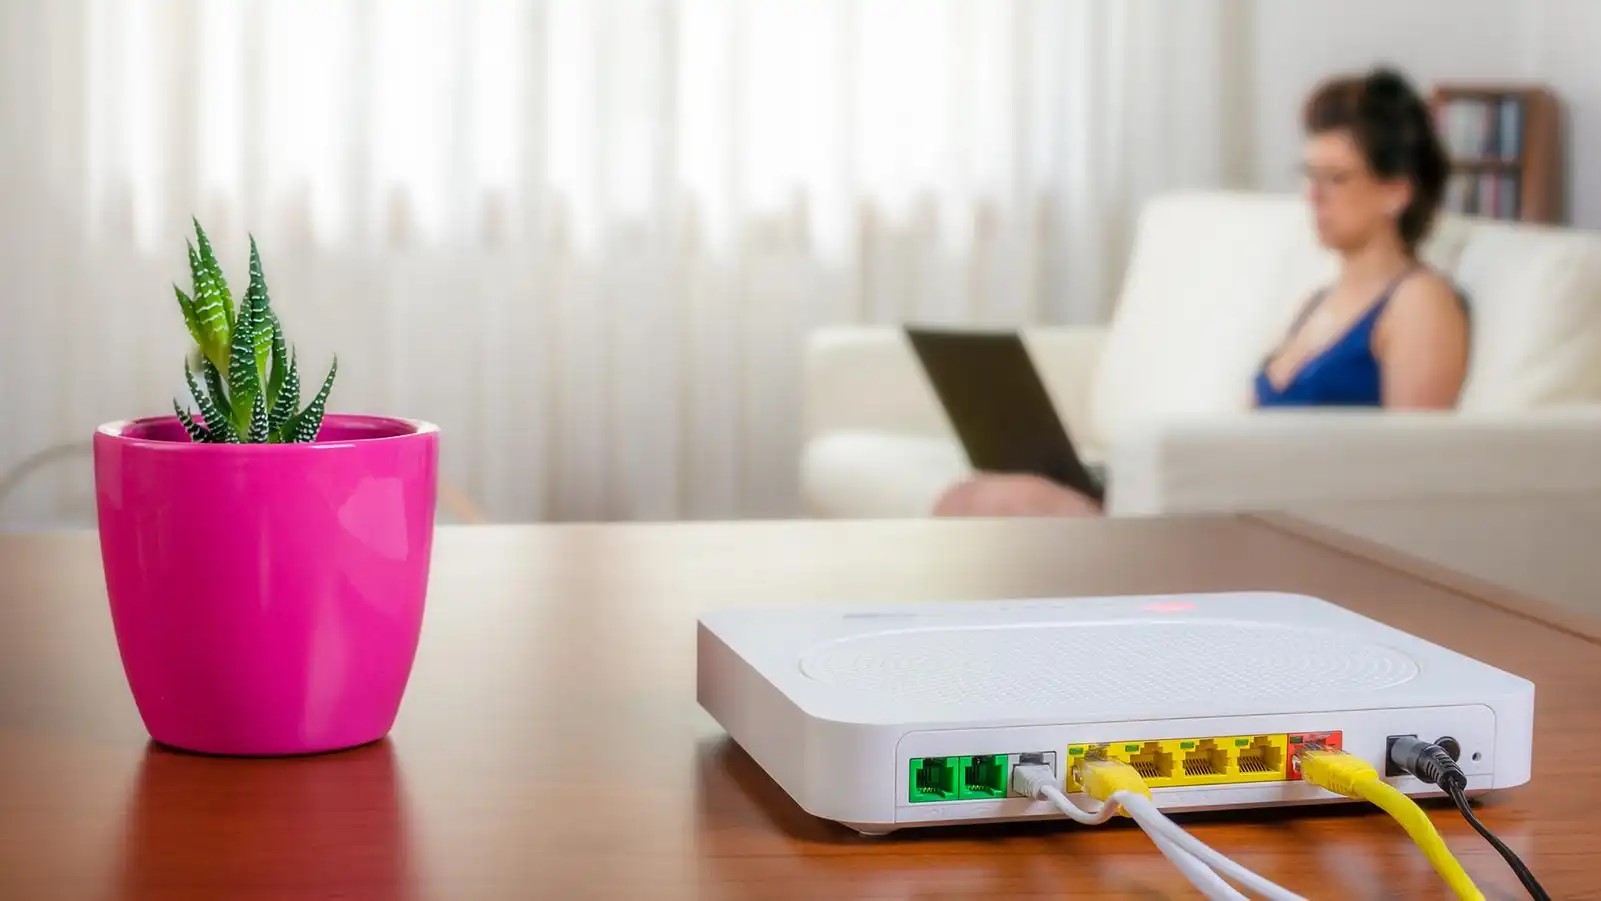 How To Change Wi-Fi Router To 2.4Ghz